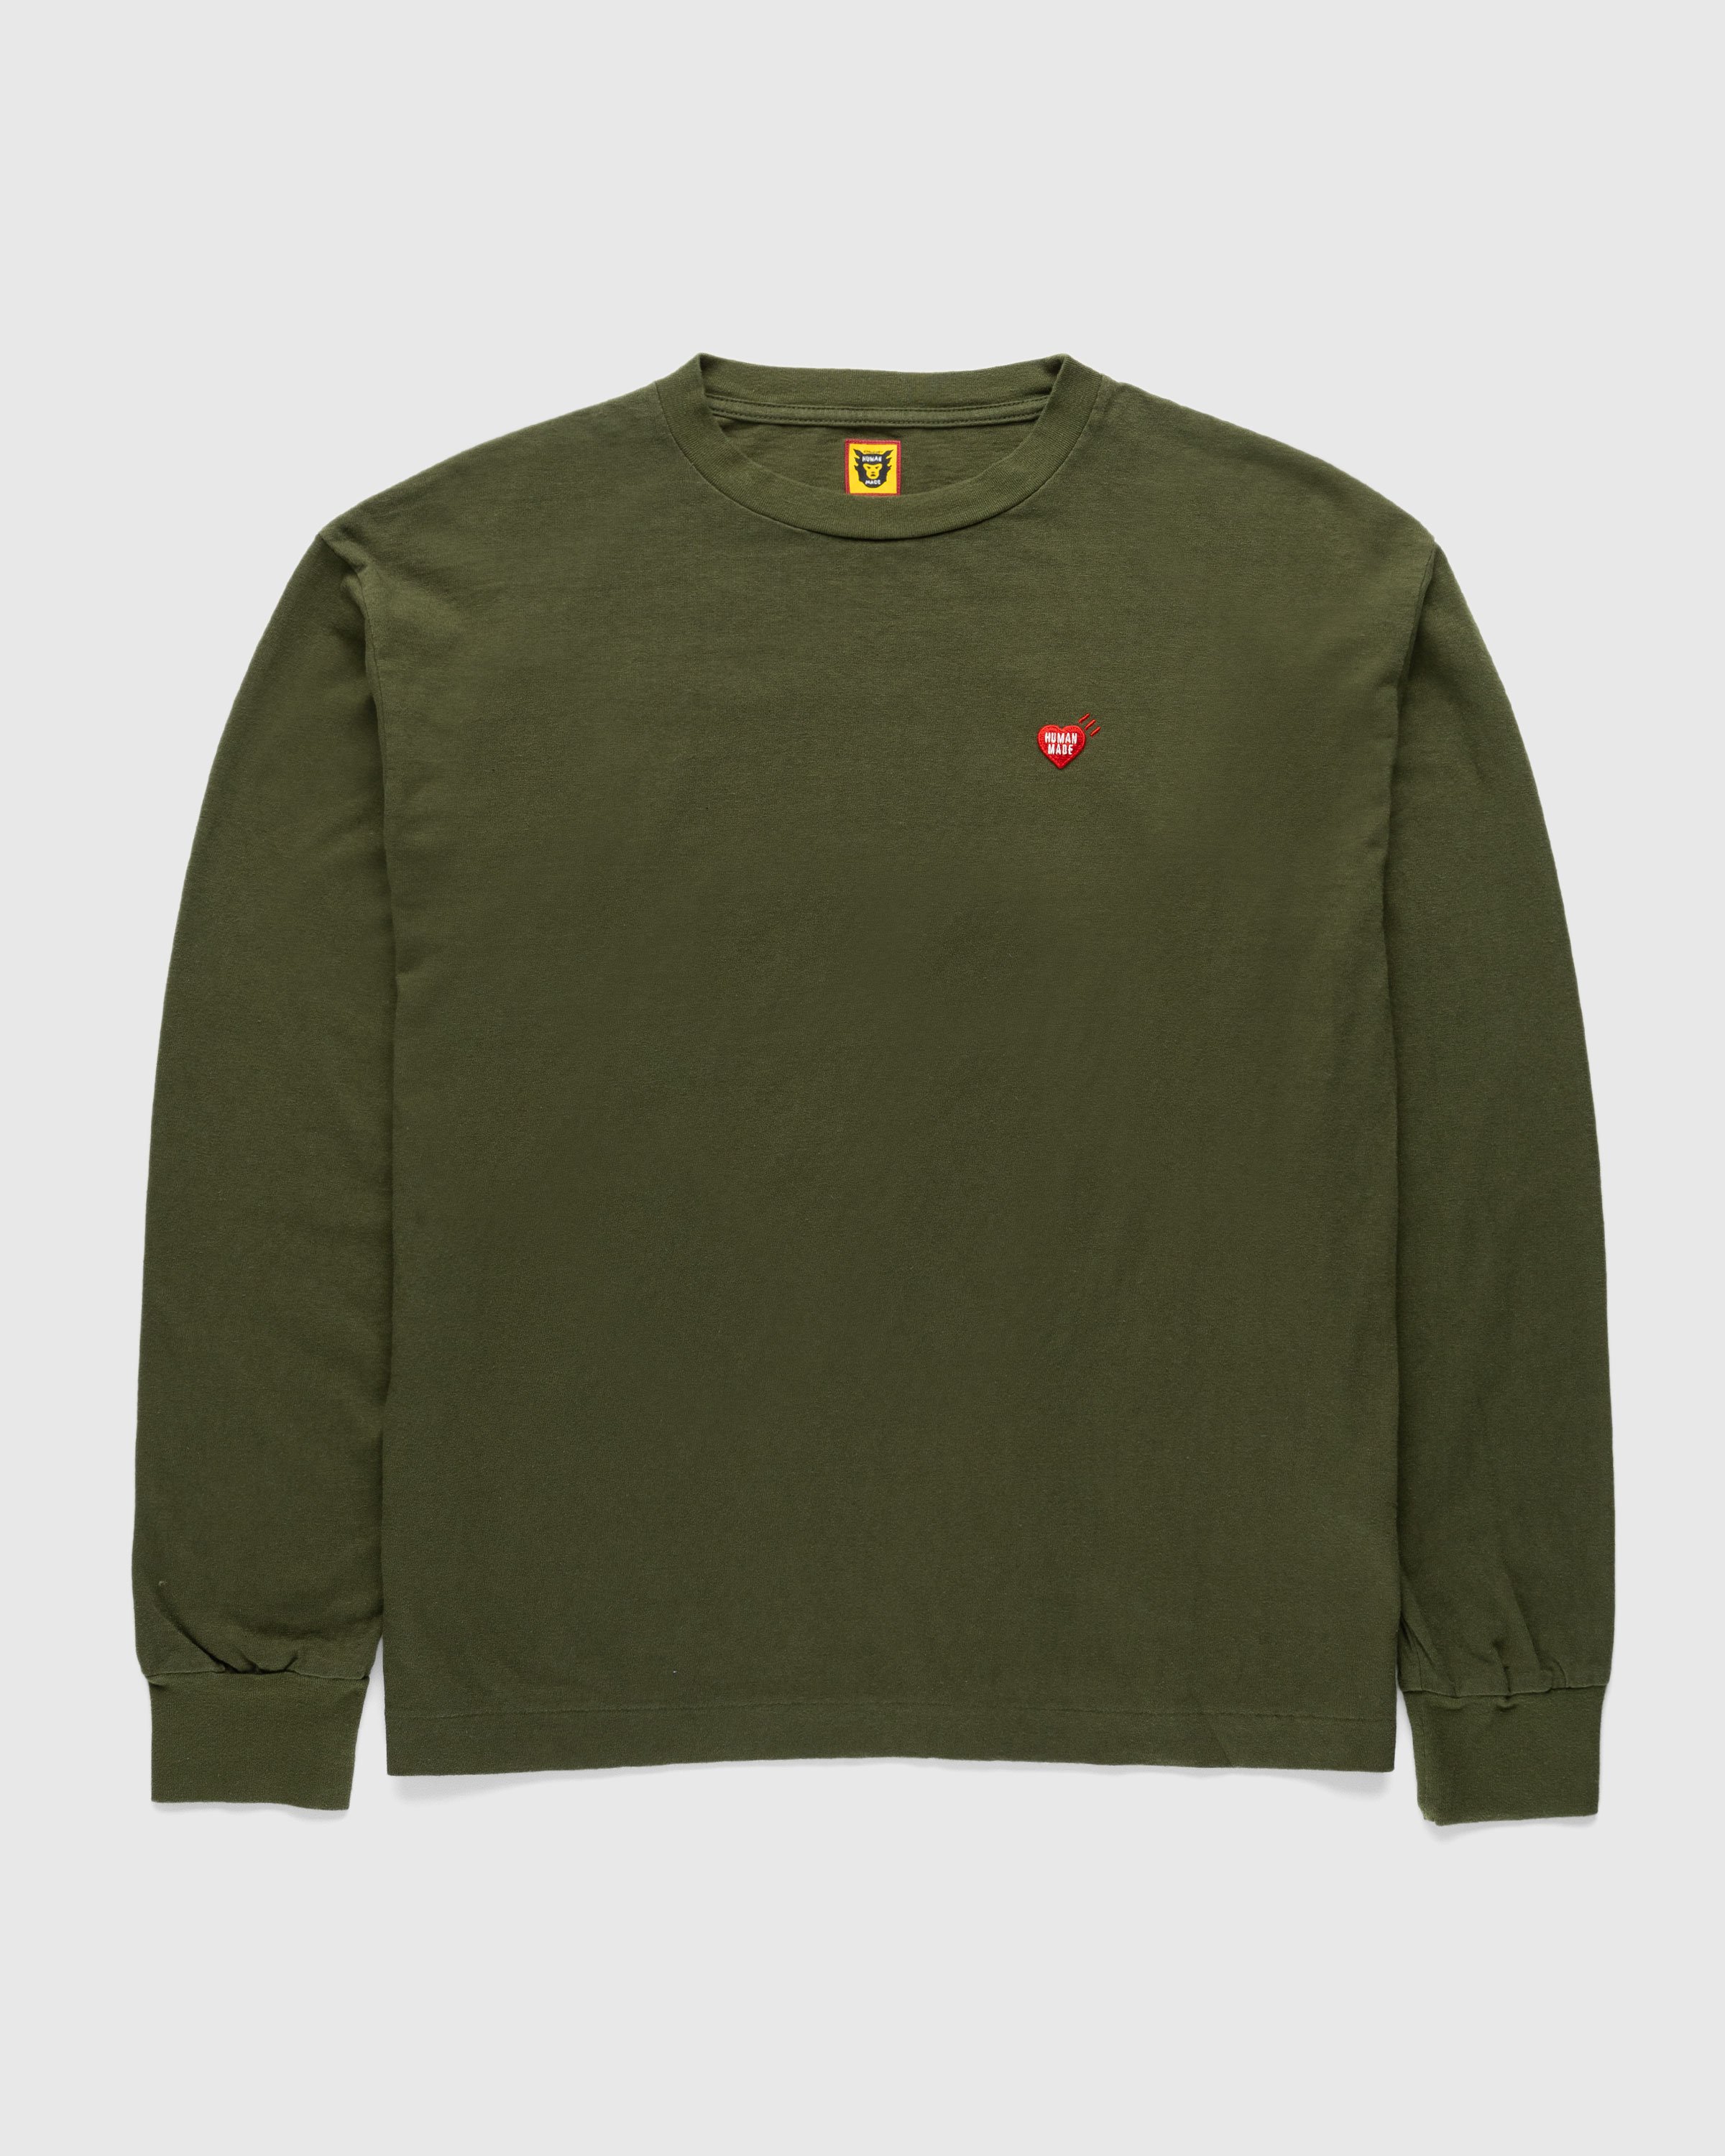 Human Made - GRAPHIC L/S T-SHIRT #1 Olive Drab - Clothing - Green - Image 1